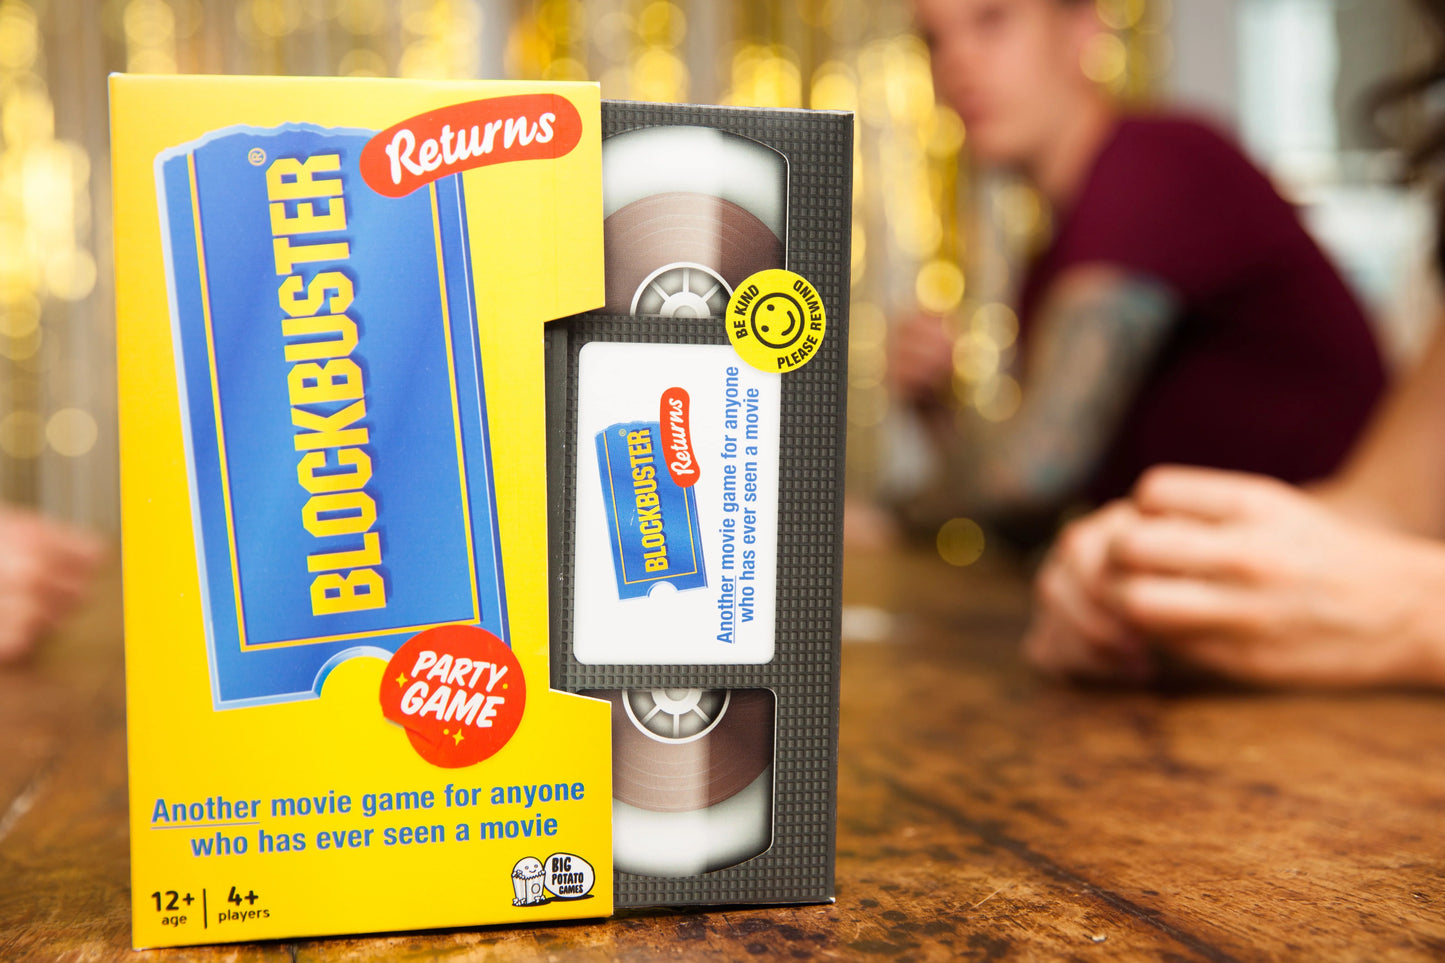 Blockbuster Returns party game by Big Potato. Sold by Board Hoarders